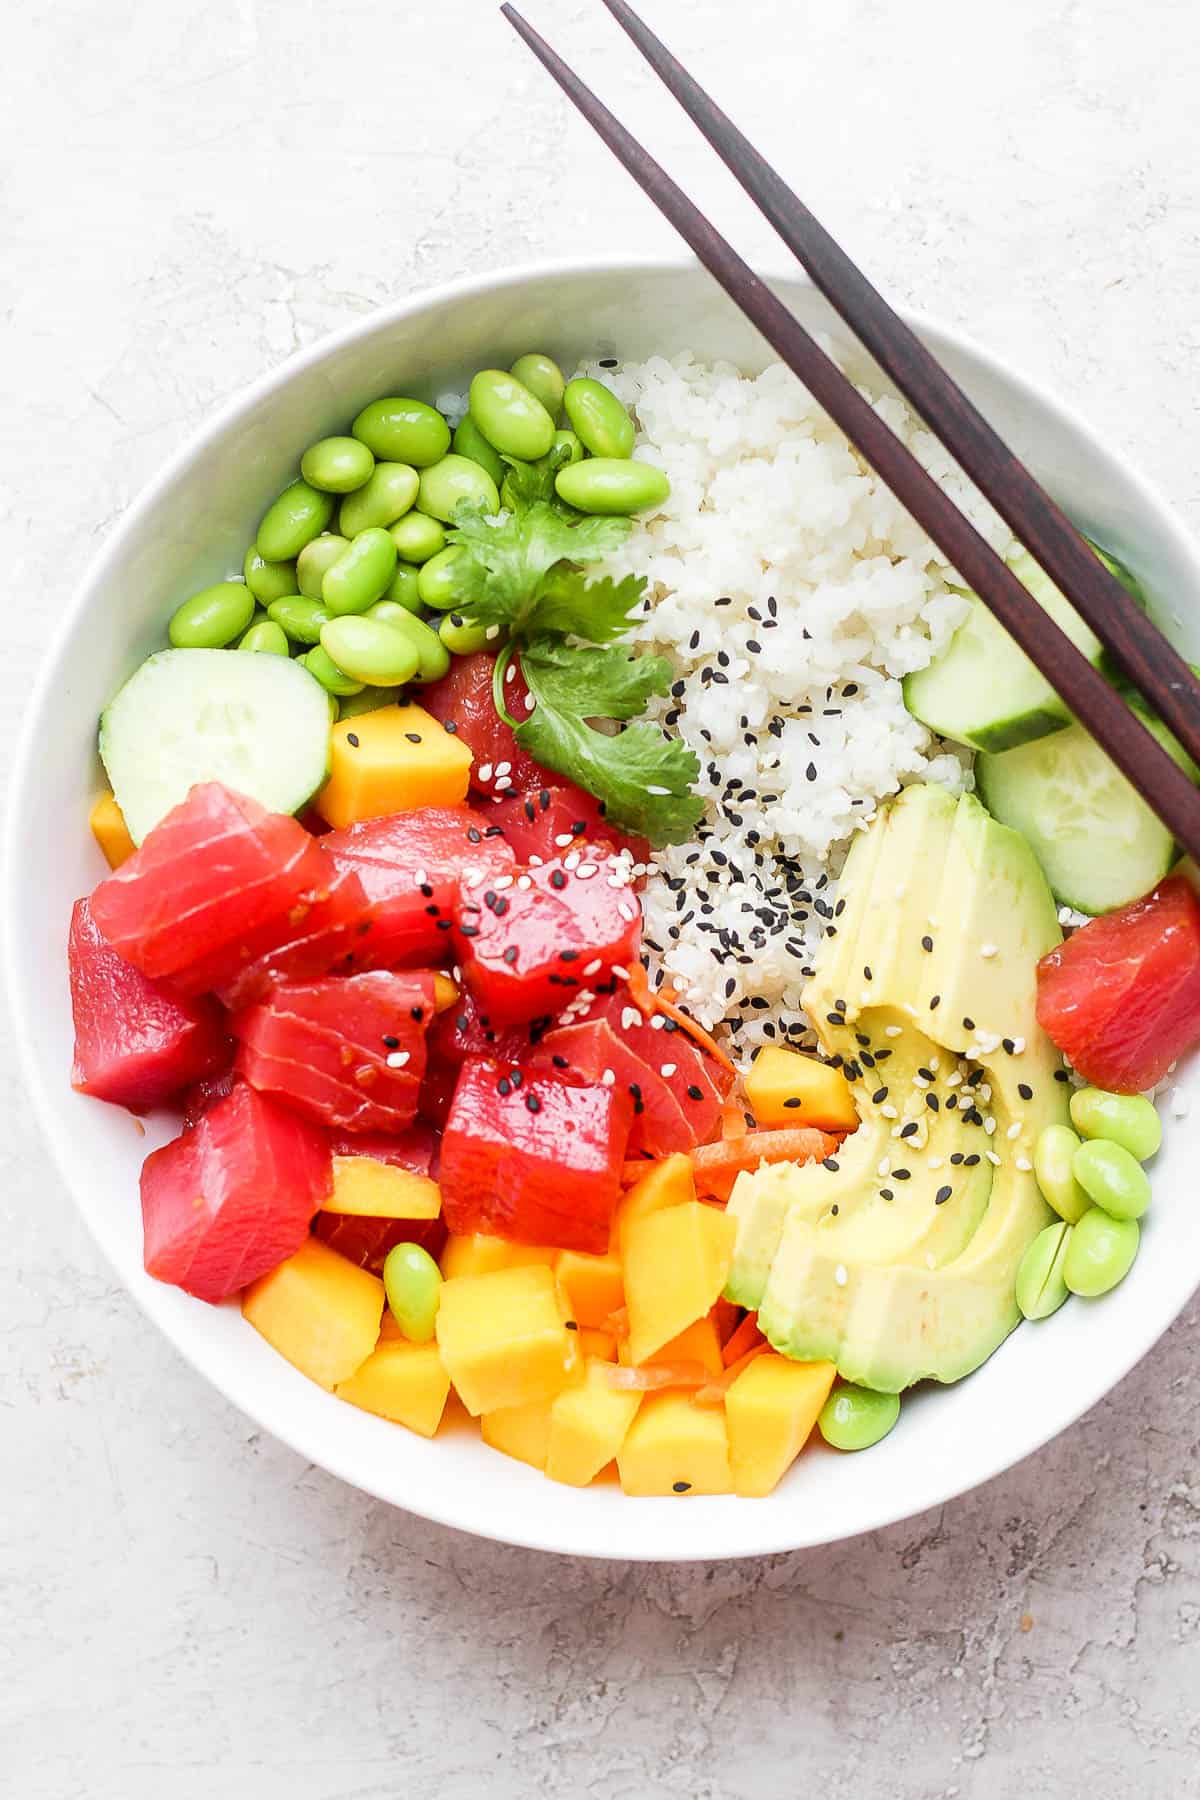 Sushi rice used in a poke bowl.